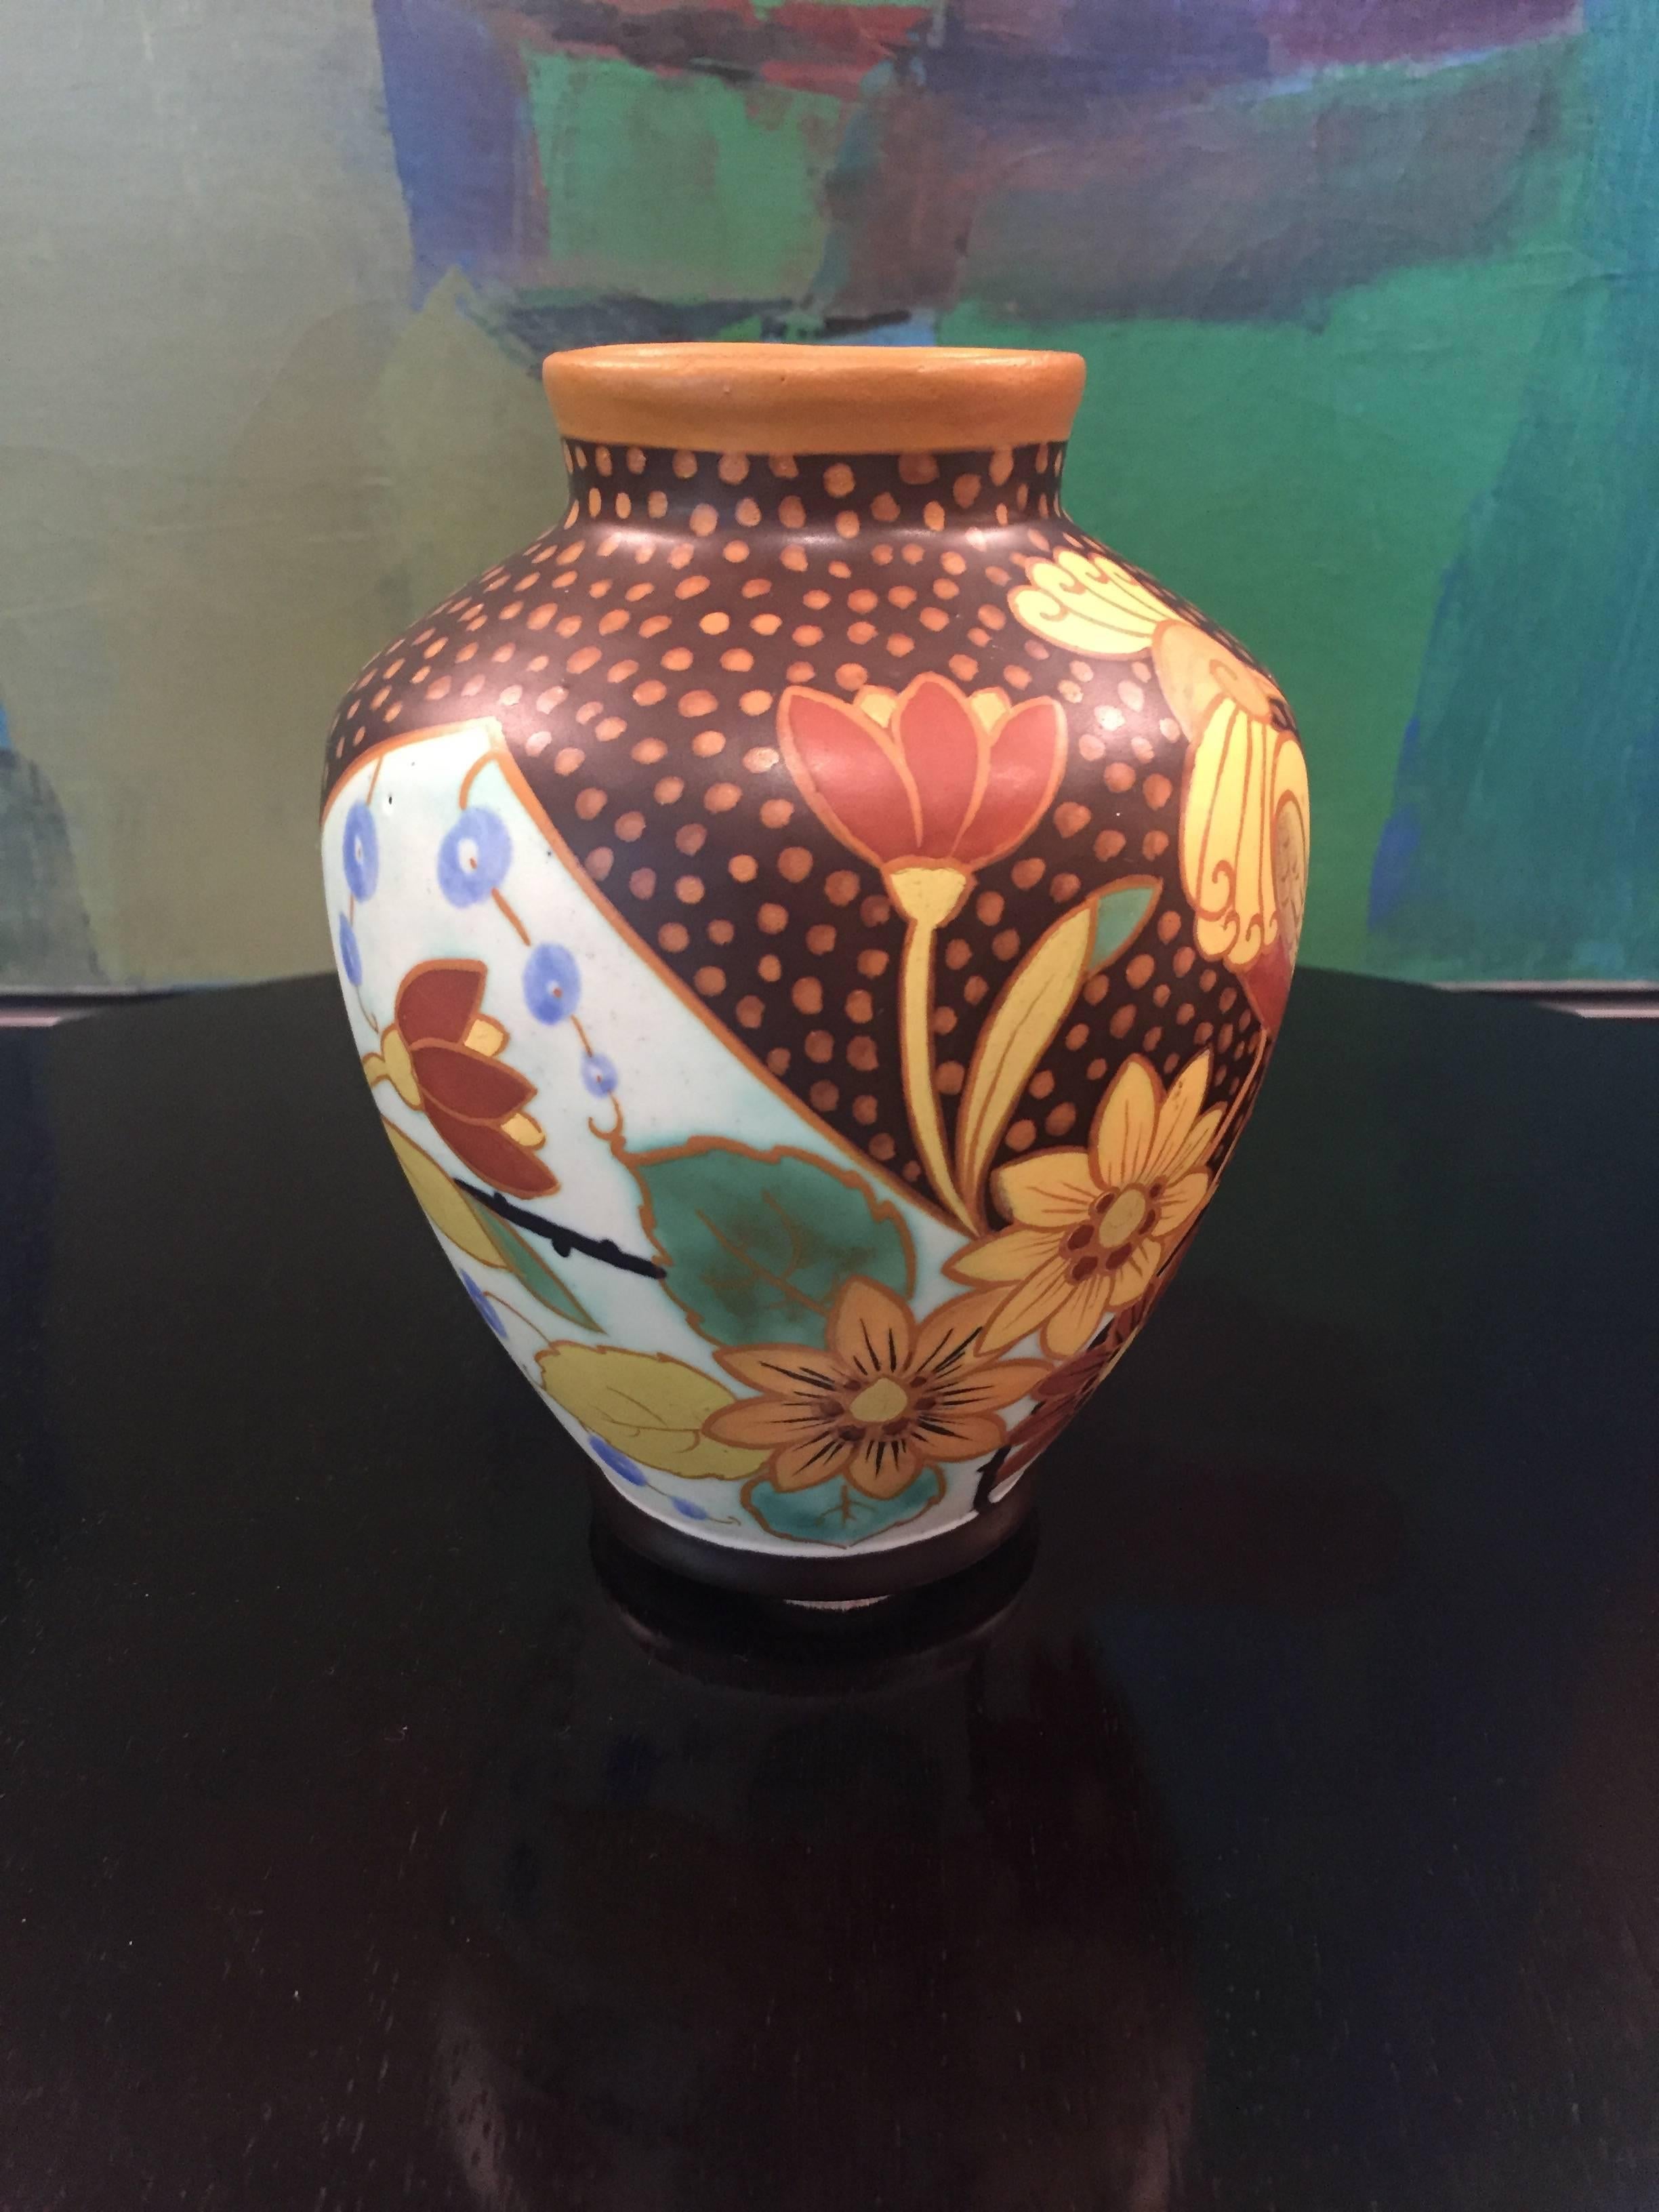 An Art Deco ovoidal vase in polychrome matte enameled earthenware with rounded shoulder and everted neck from the Belgian Boch Frères Keramis Factory. The tropical decor covering the body features a stylized crested parrot amongst blossoming